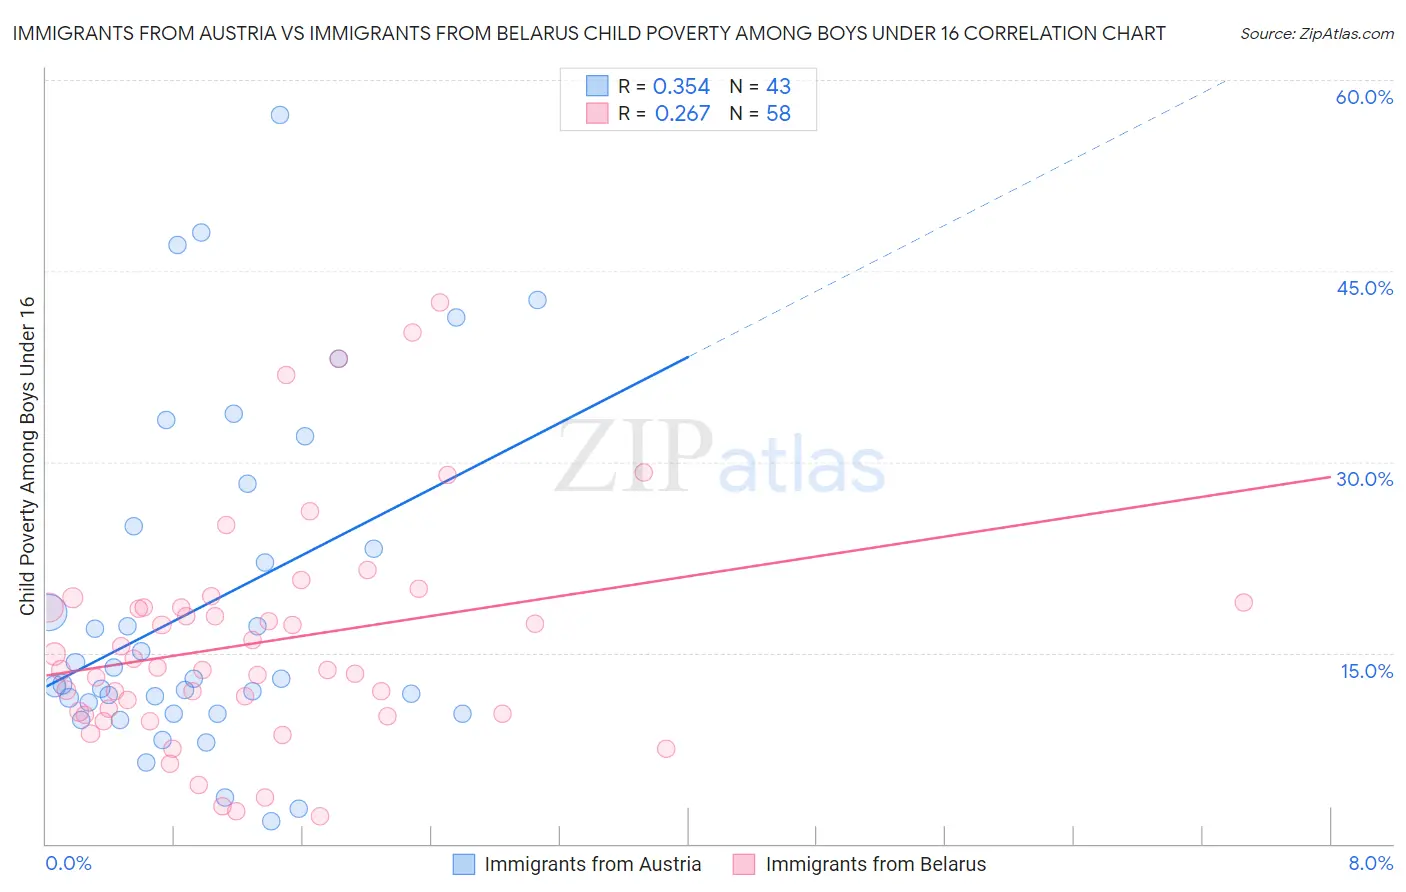 Immigrants from Austria vs Immigrants from Belarus Child Poverty Among Boys Under 16